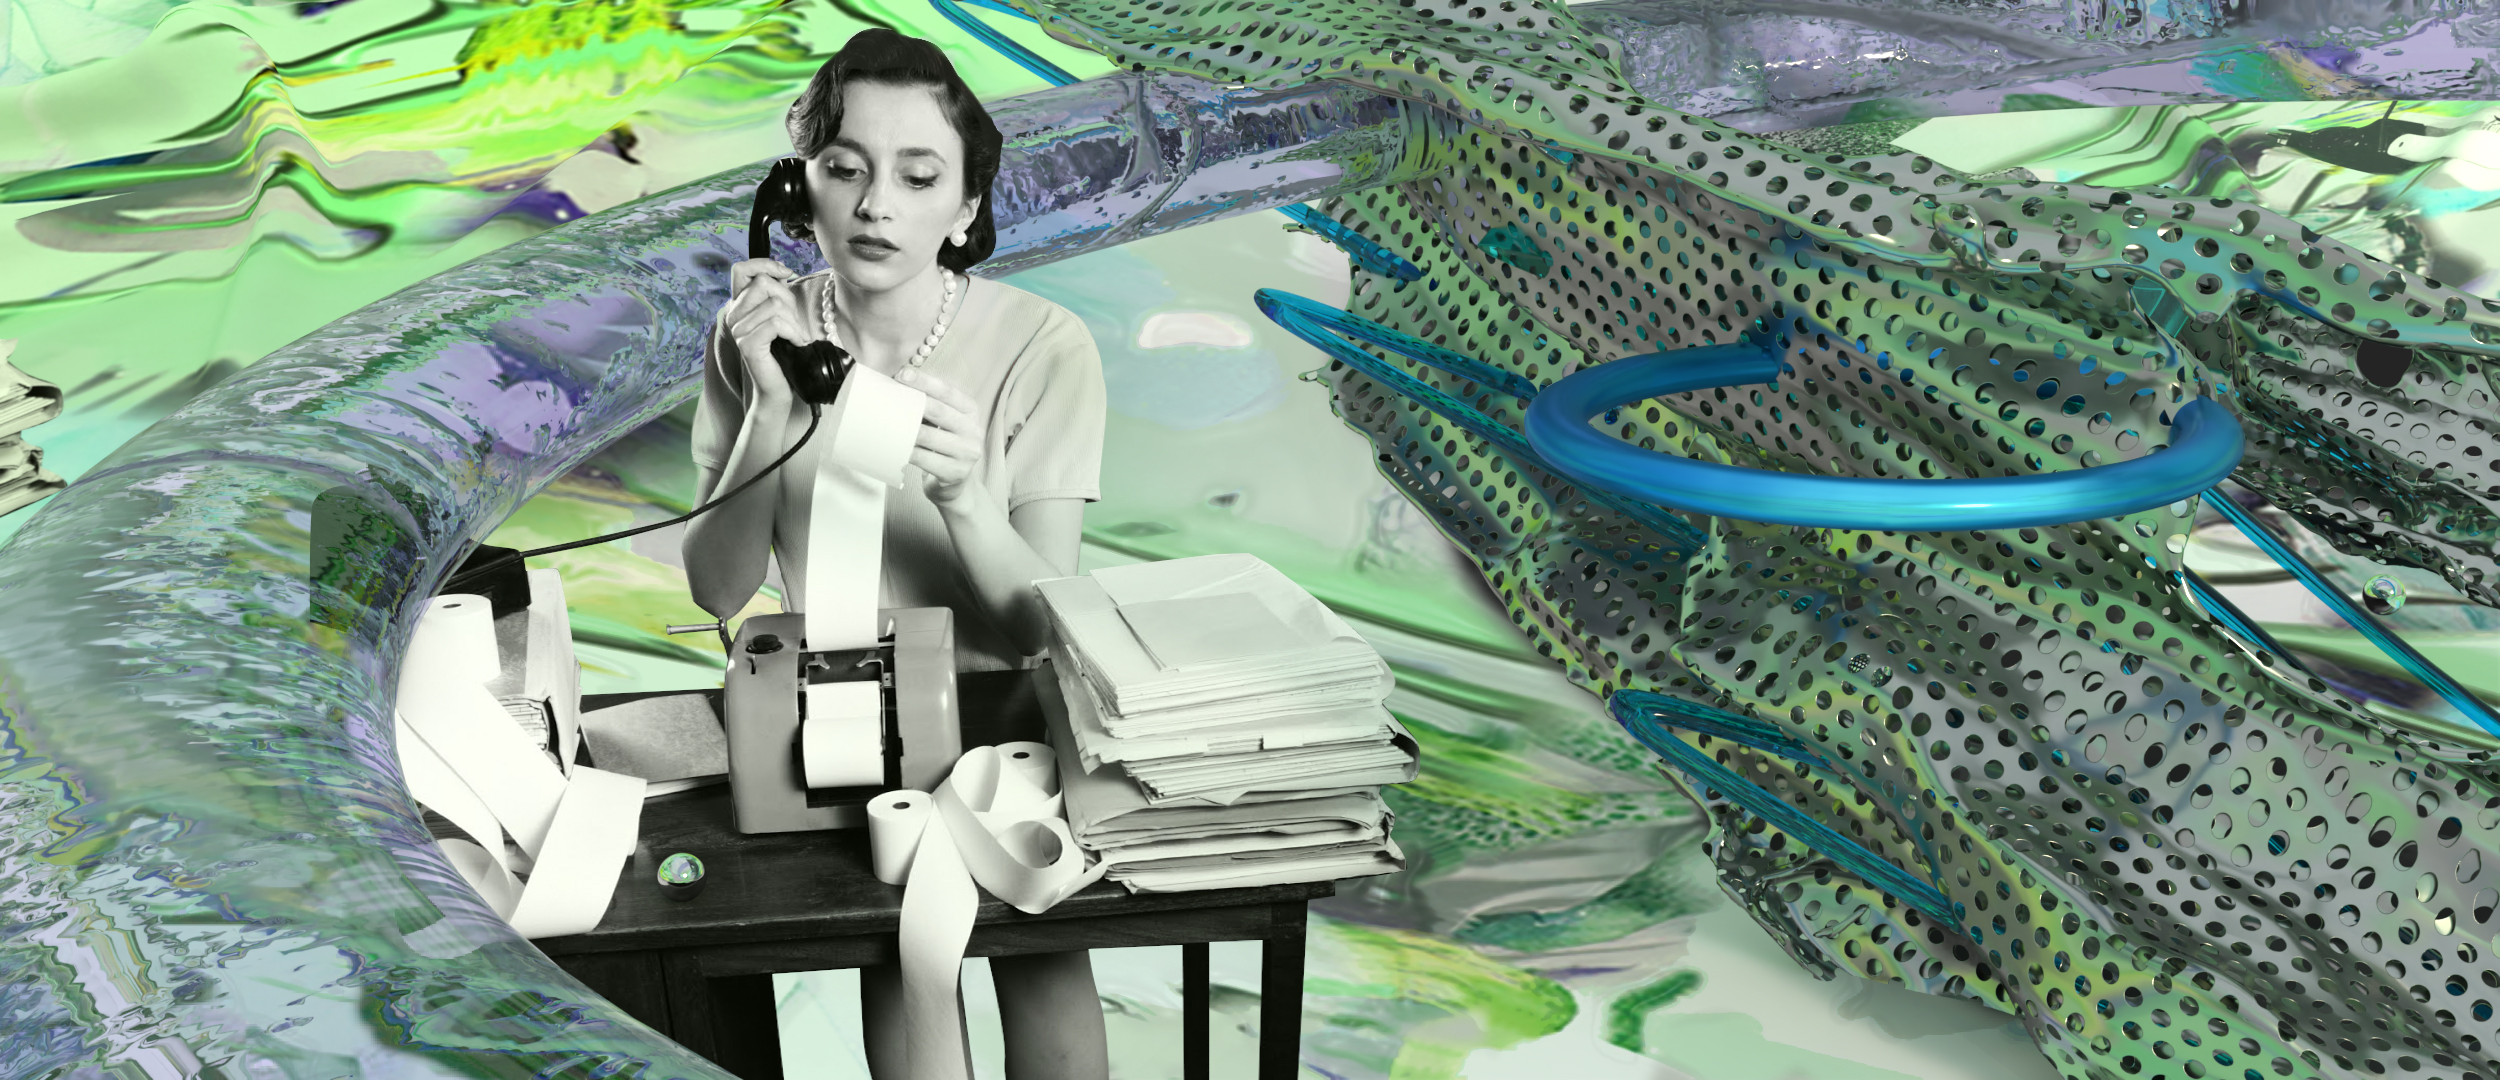 An illustration of a 1950s female secretary surrounded by glitch material resembling smart speakers